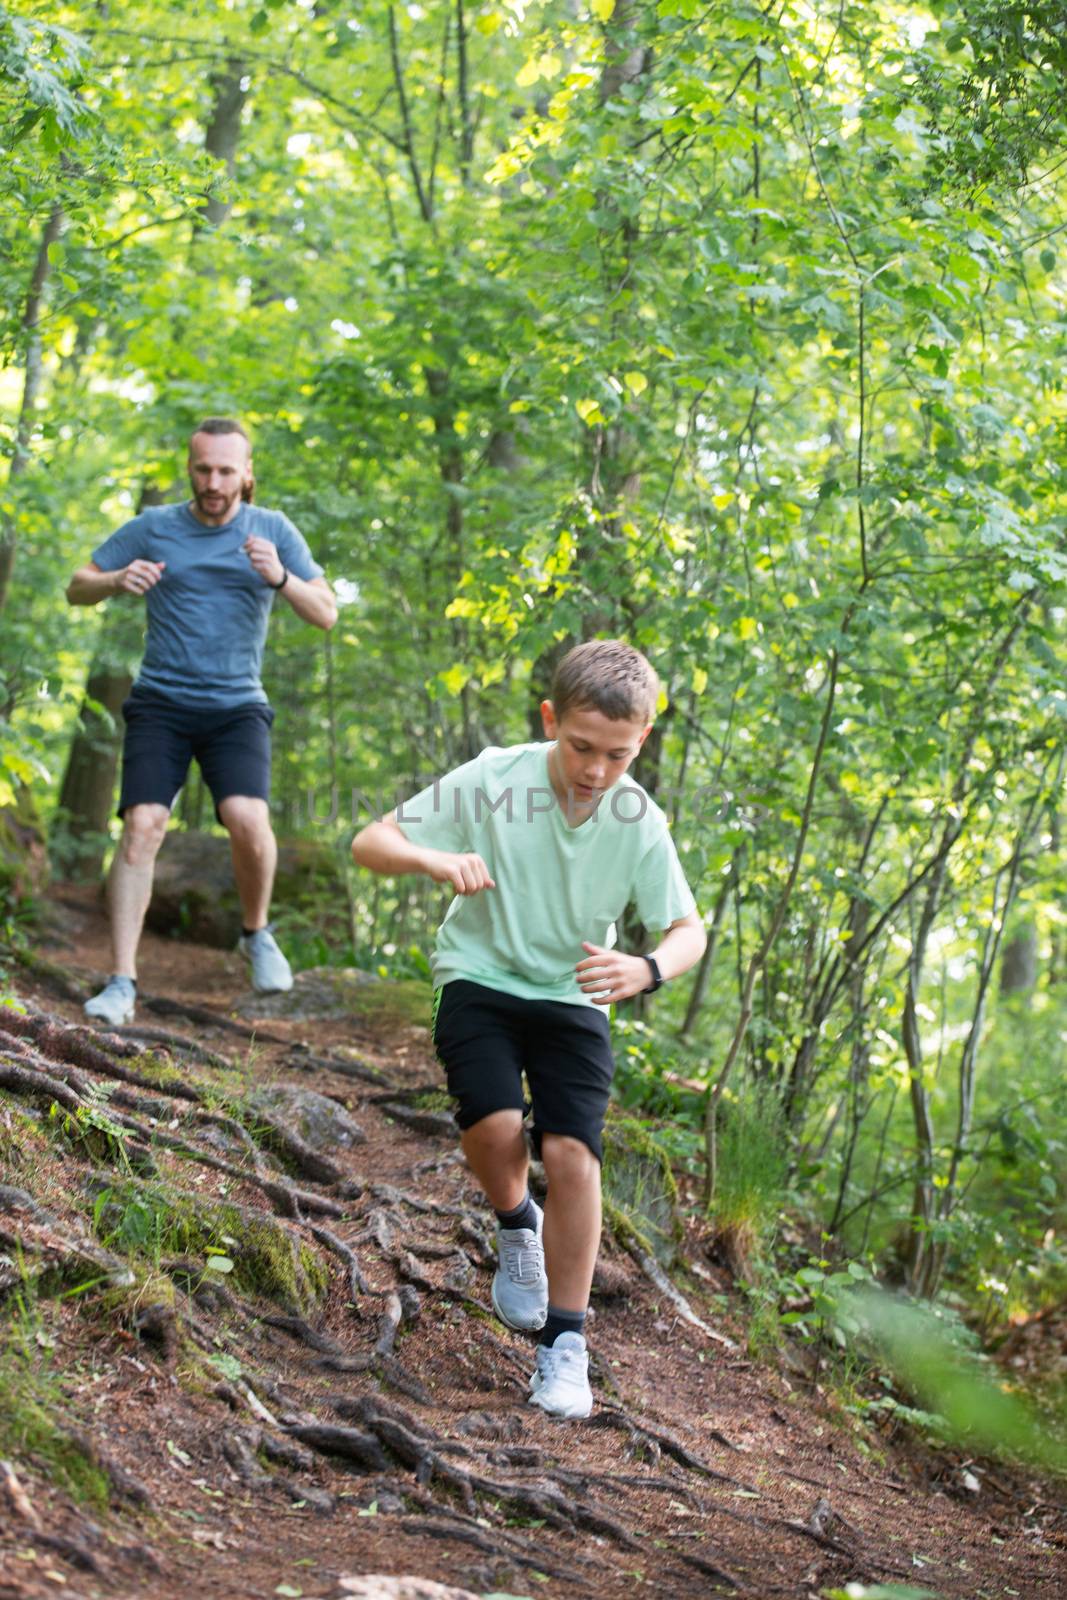 Father and son run in forest together, care, sport, parenting, healthy lifestyle concept